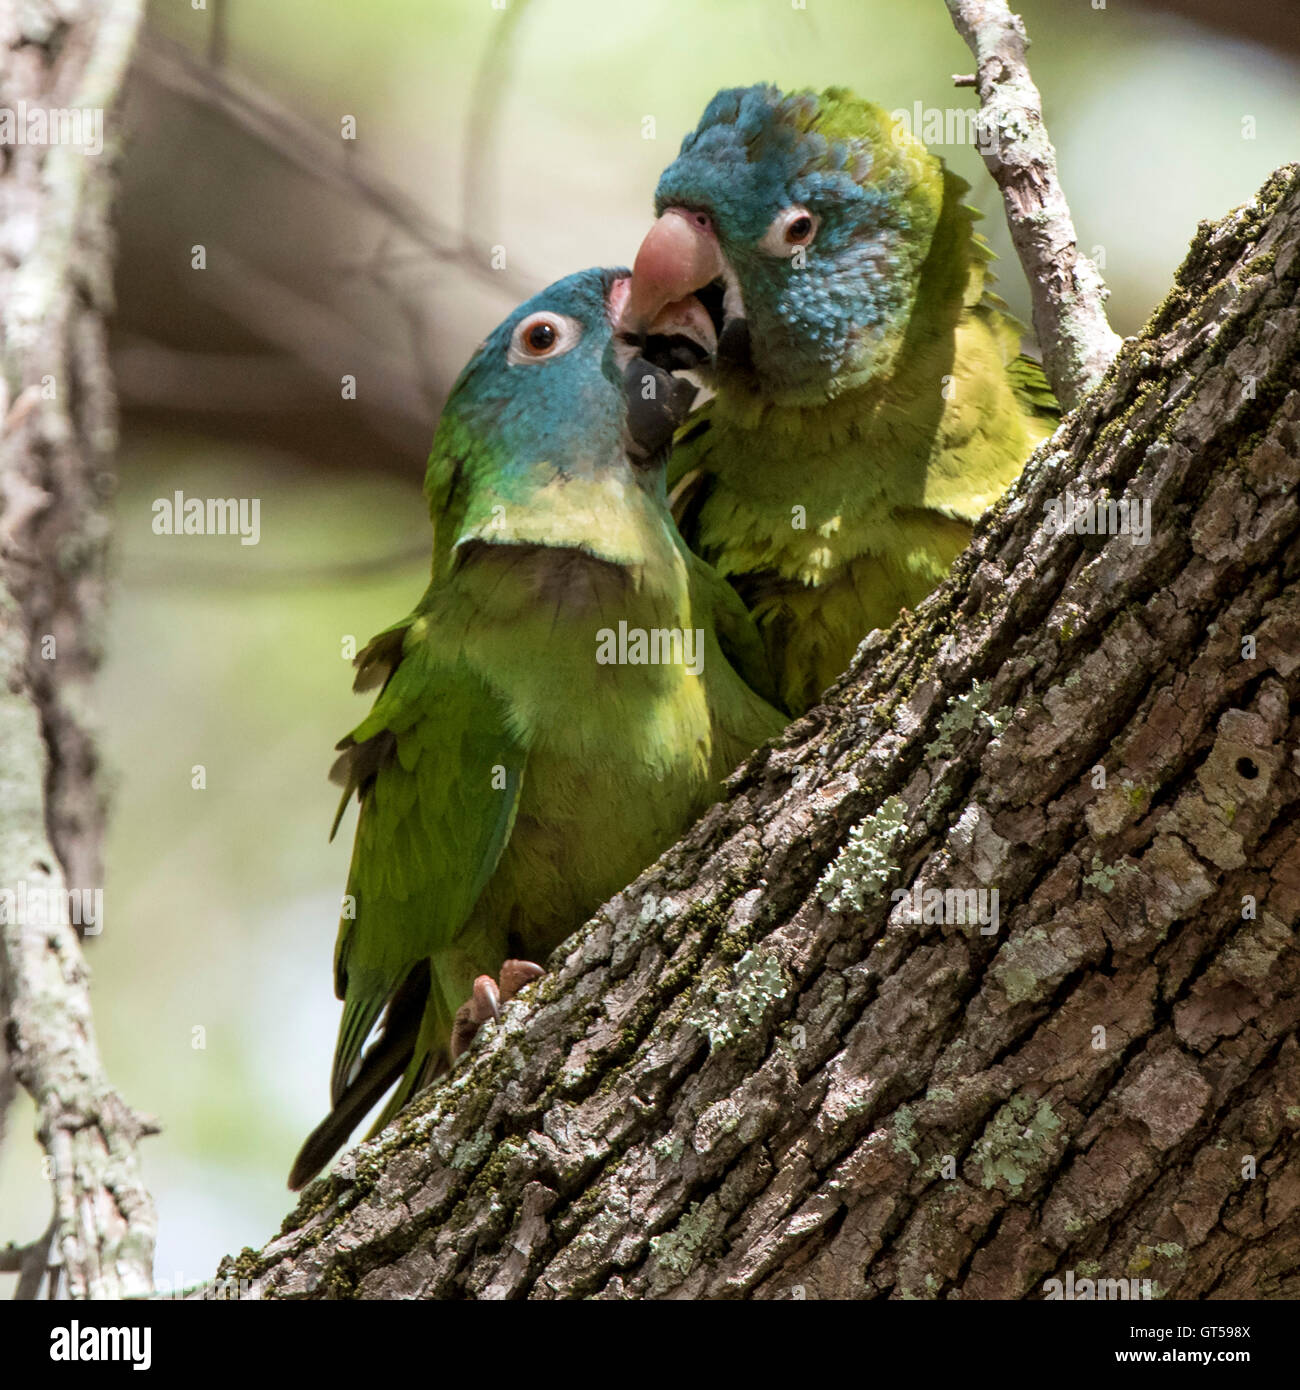 Love BIrds giving each other a kiss. Stock Photo